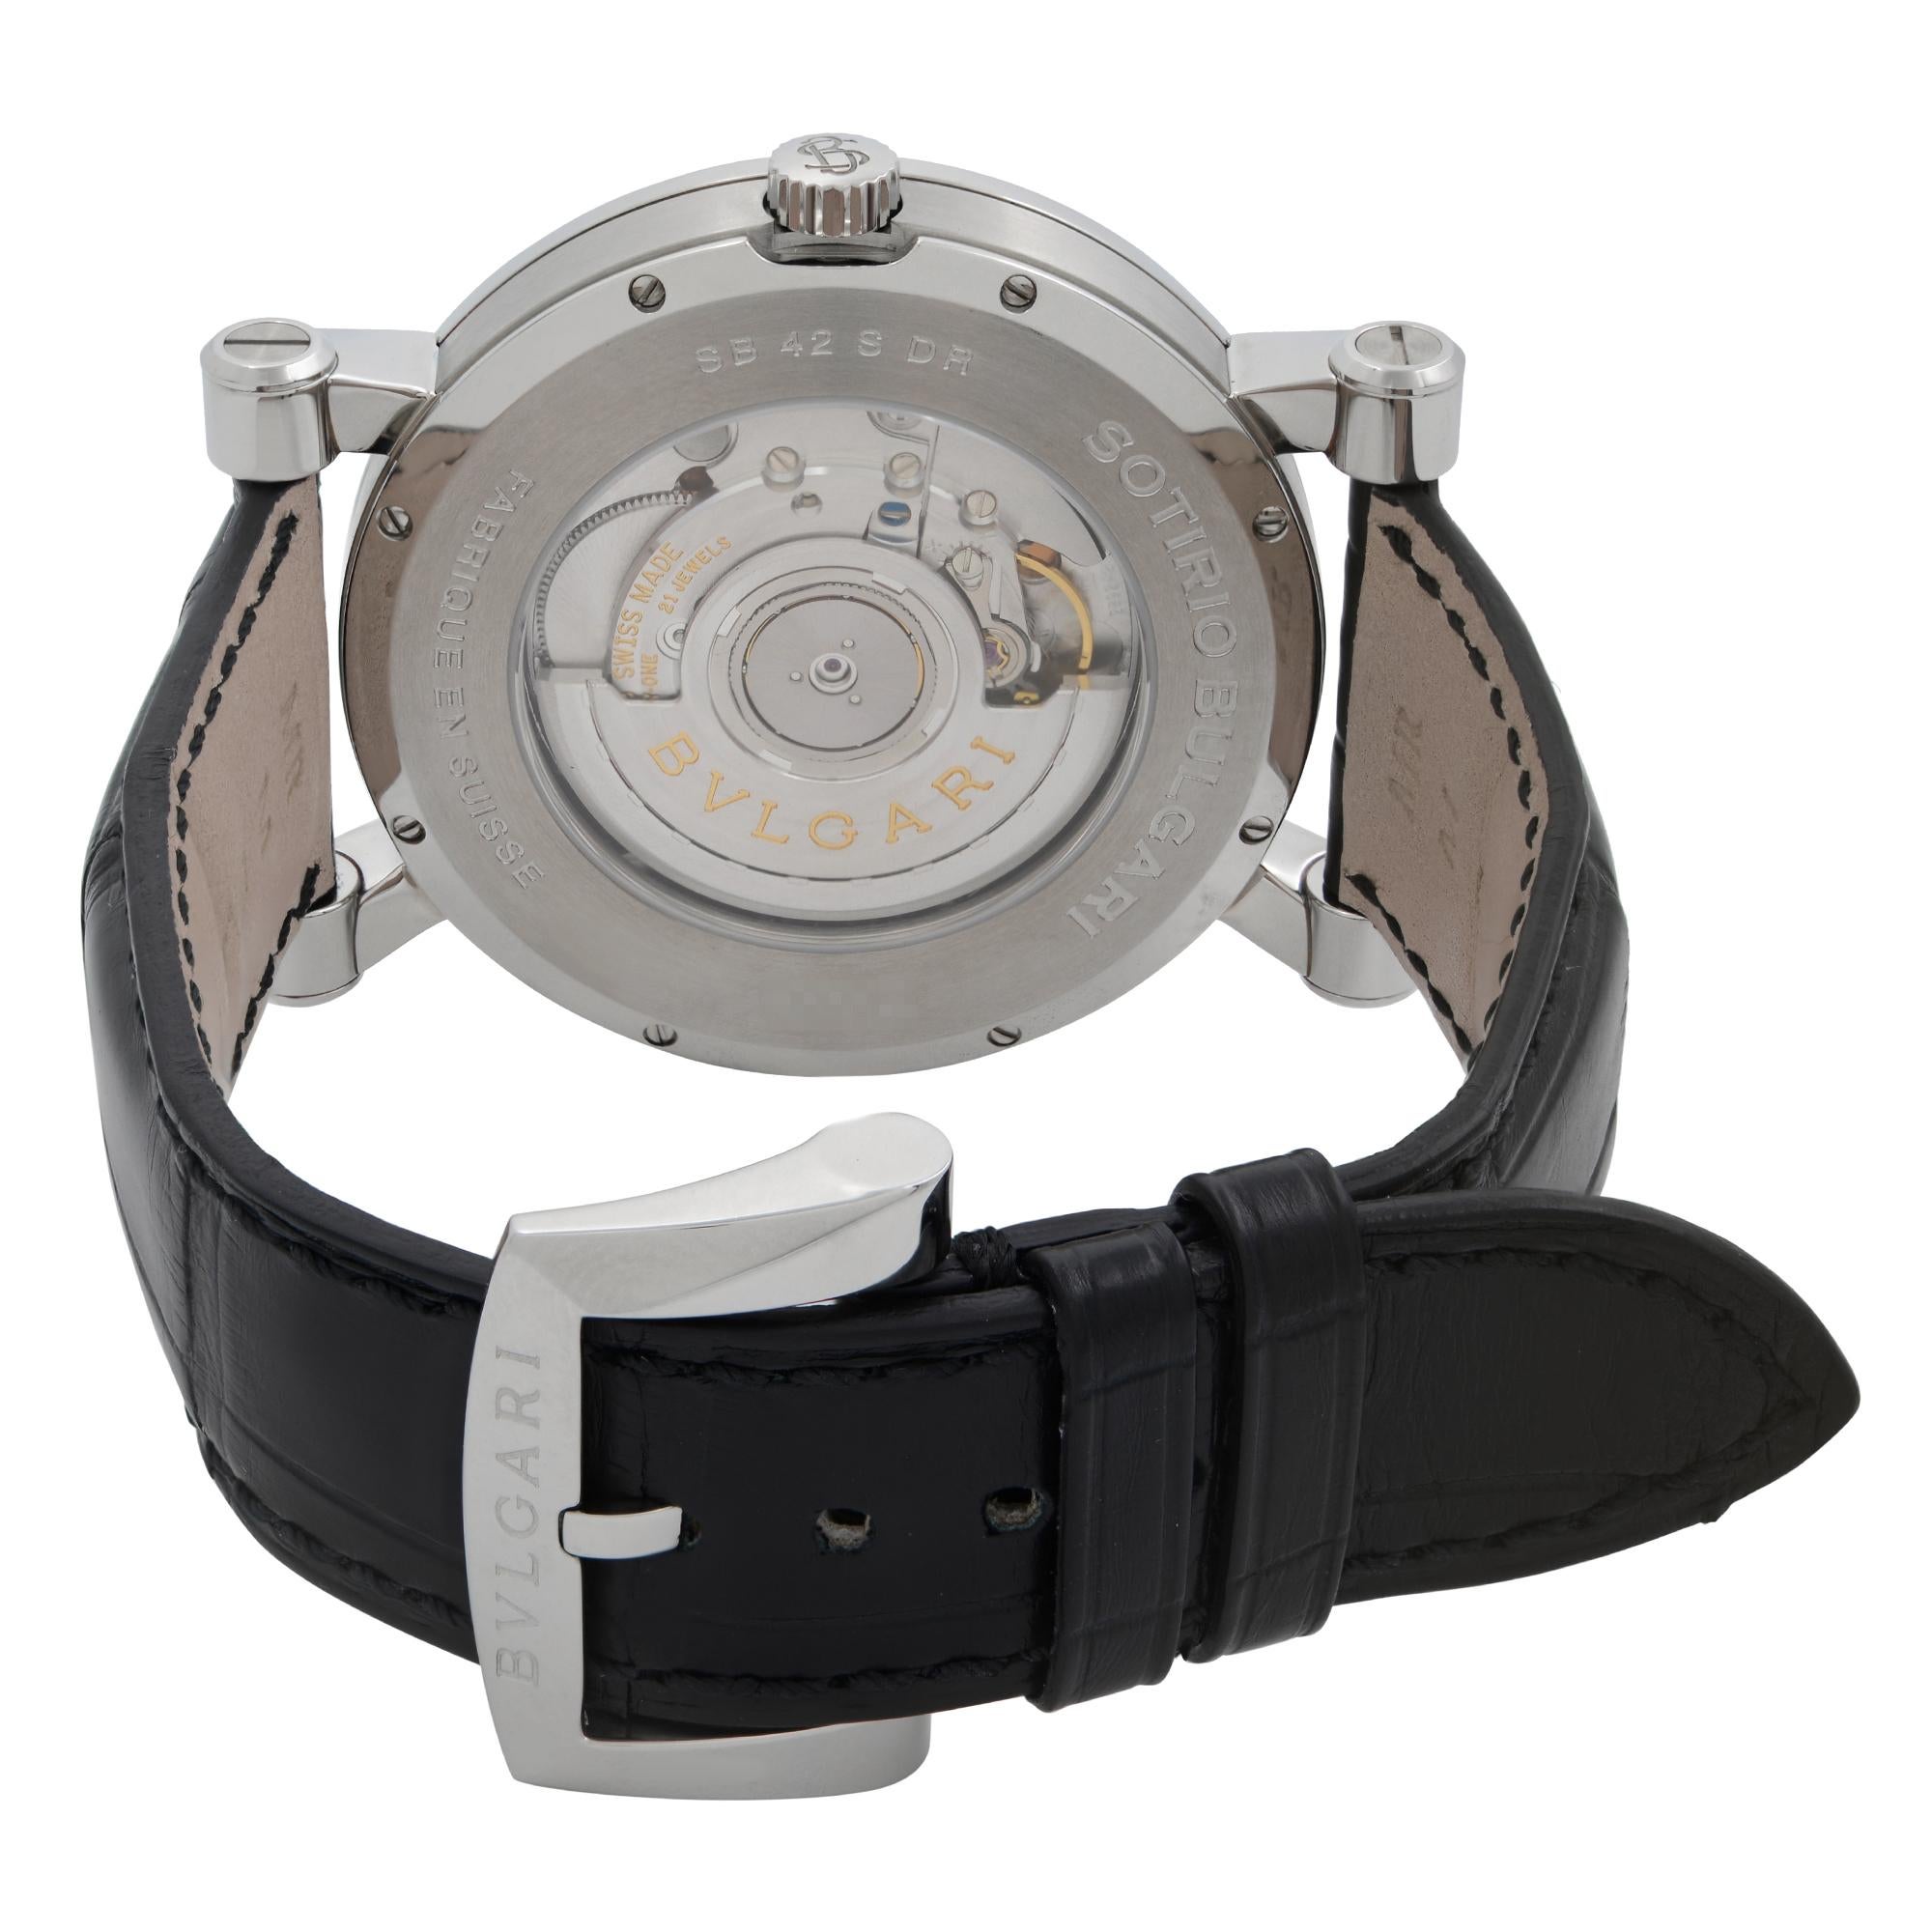 Bvlgari Sotirio Retrograde Steel White Dial Automatic Mens Watch SB42SDR In New Condition For Sale In New York, NY